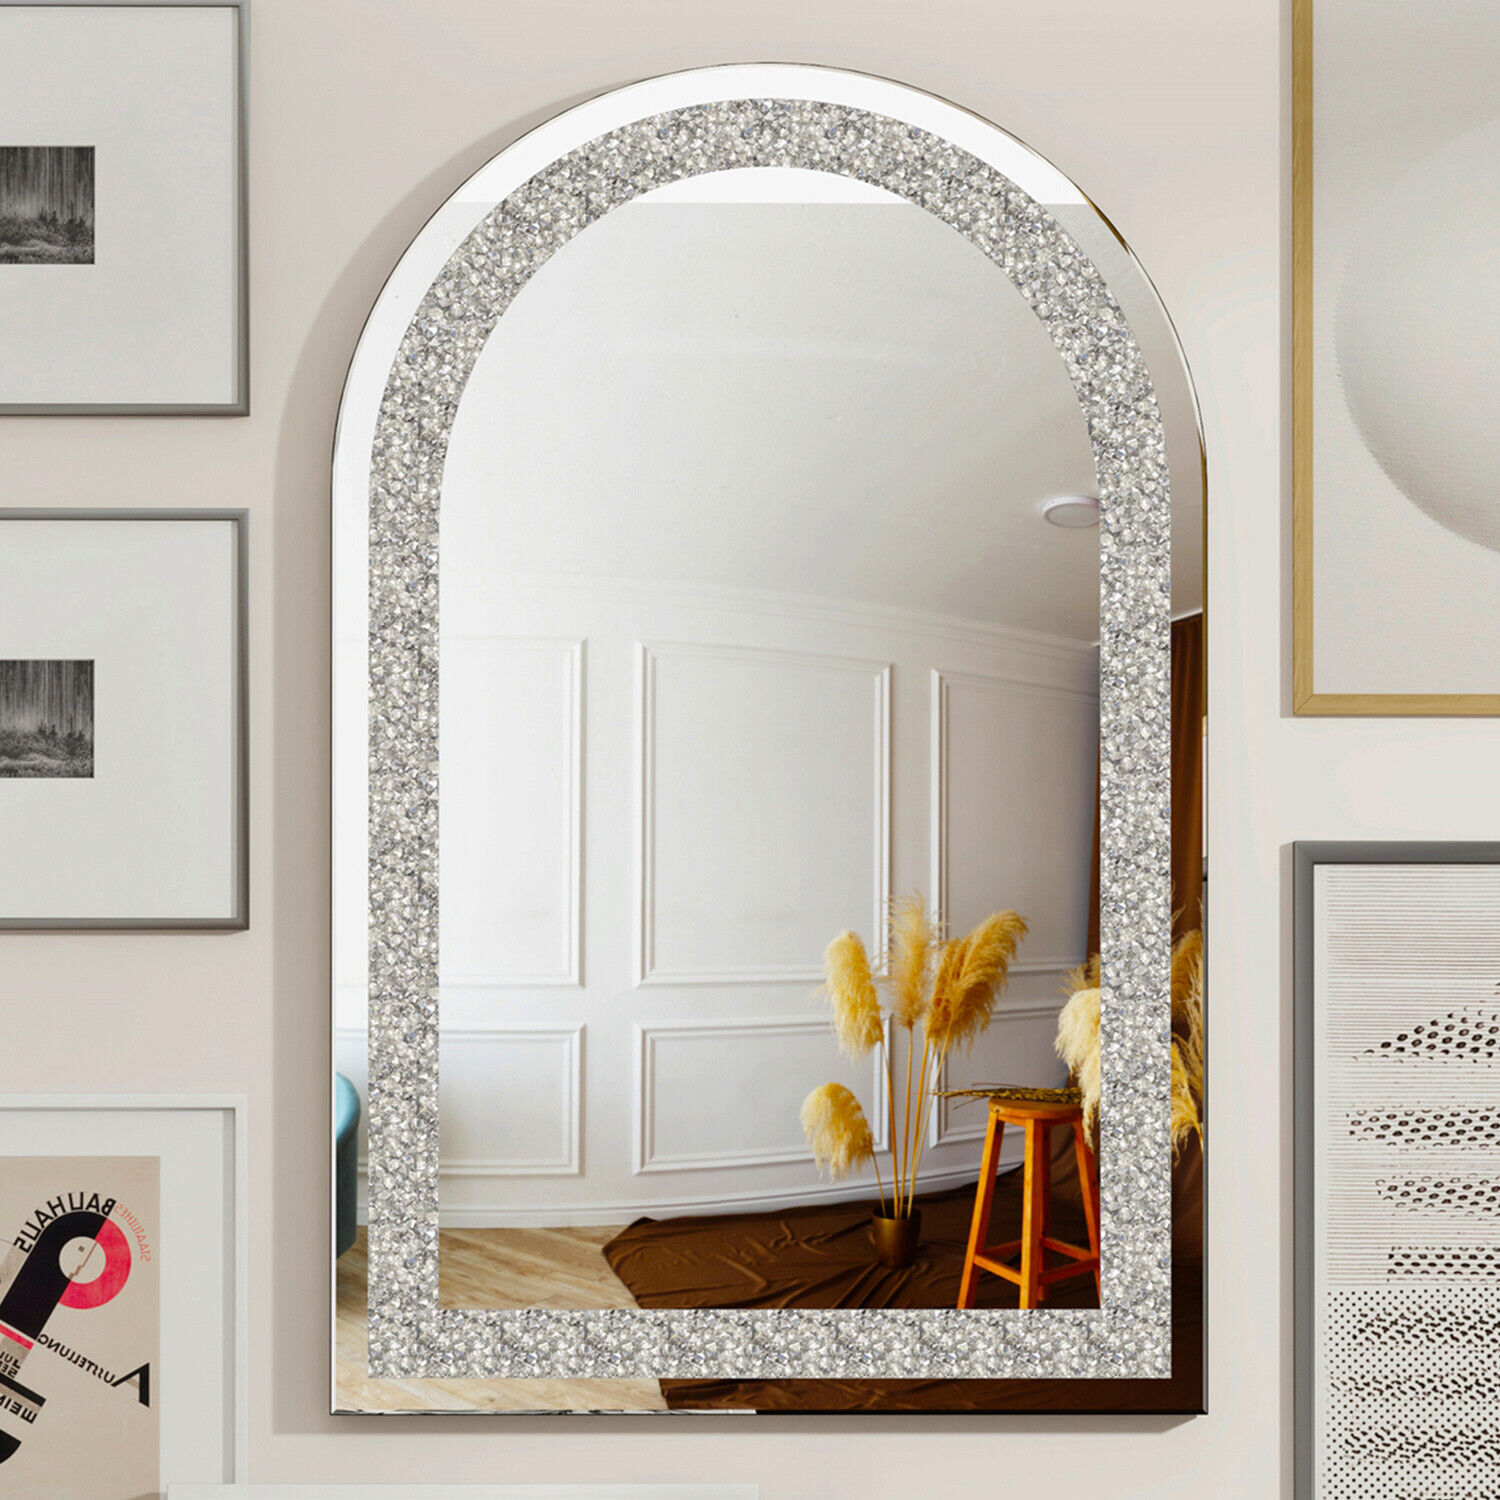 Wisfor Crushed Diamond Mirror Bling Crystal Wall Mounted  Bathroom Mirror Arched